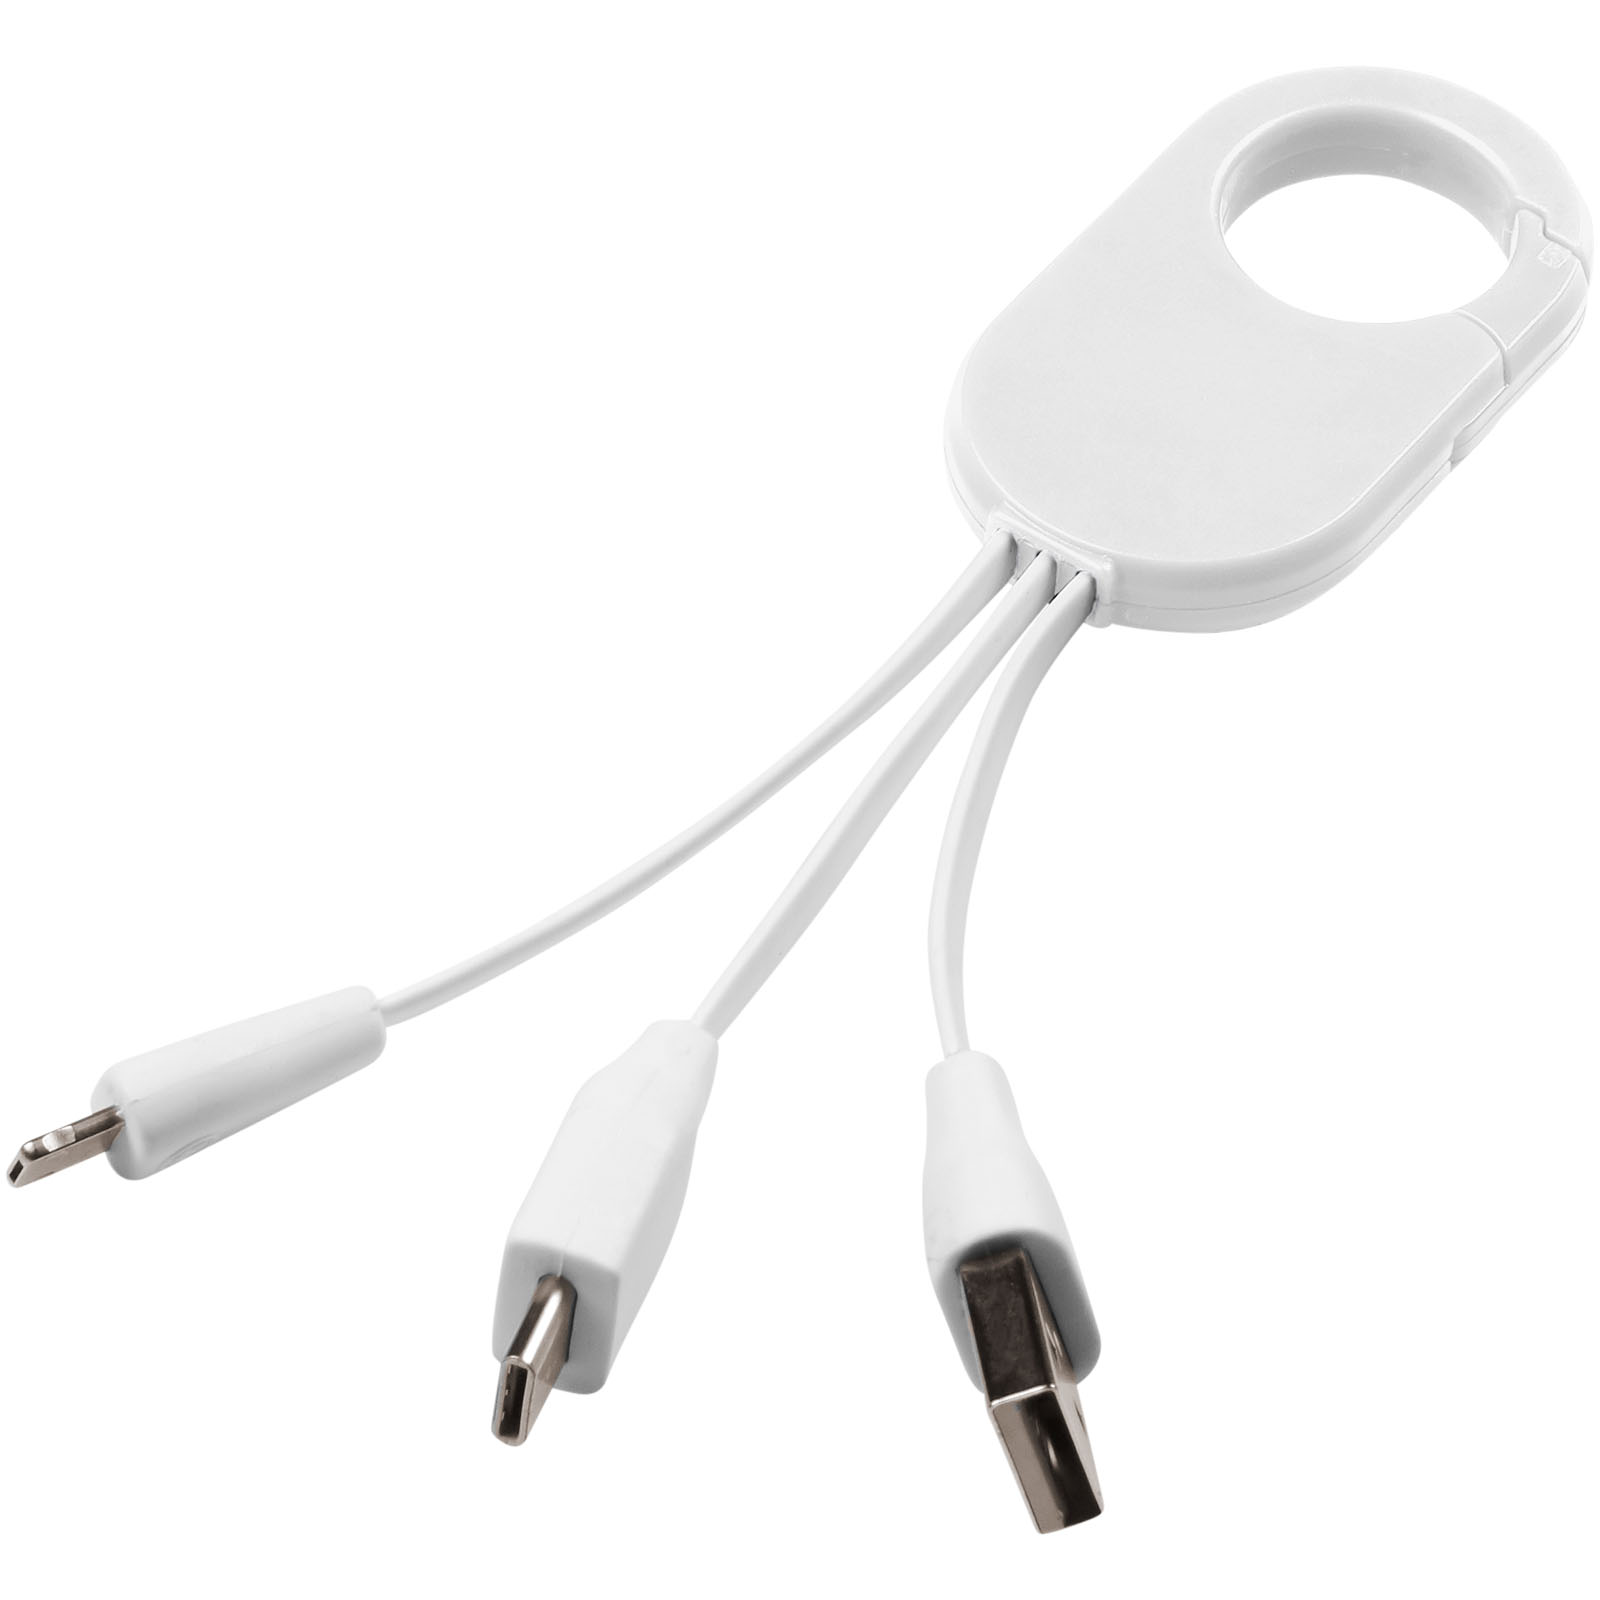 Advertising Cables - Troop 3-in-1 charging cable - 0